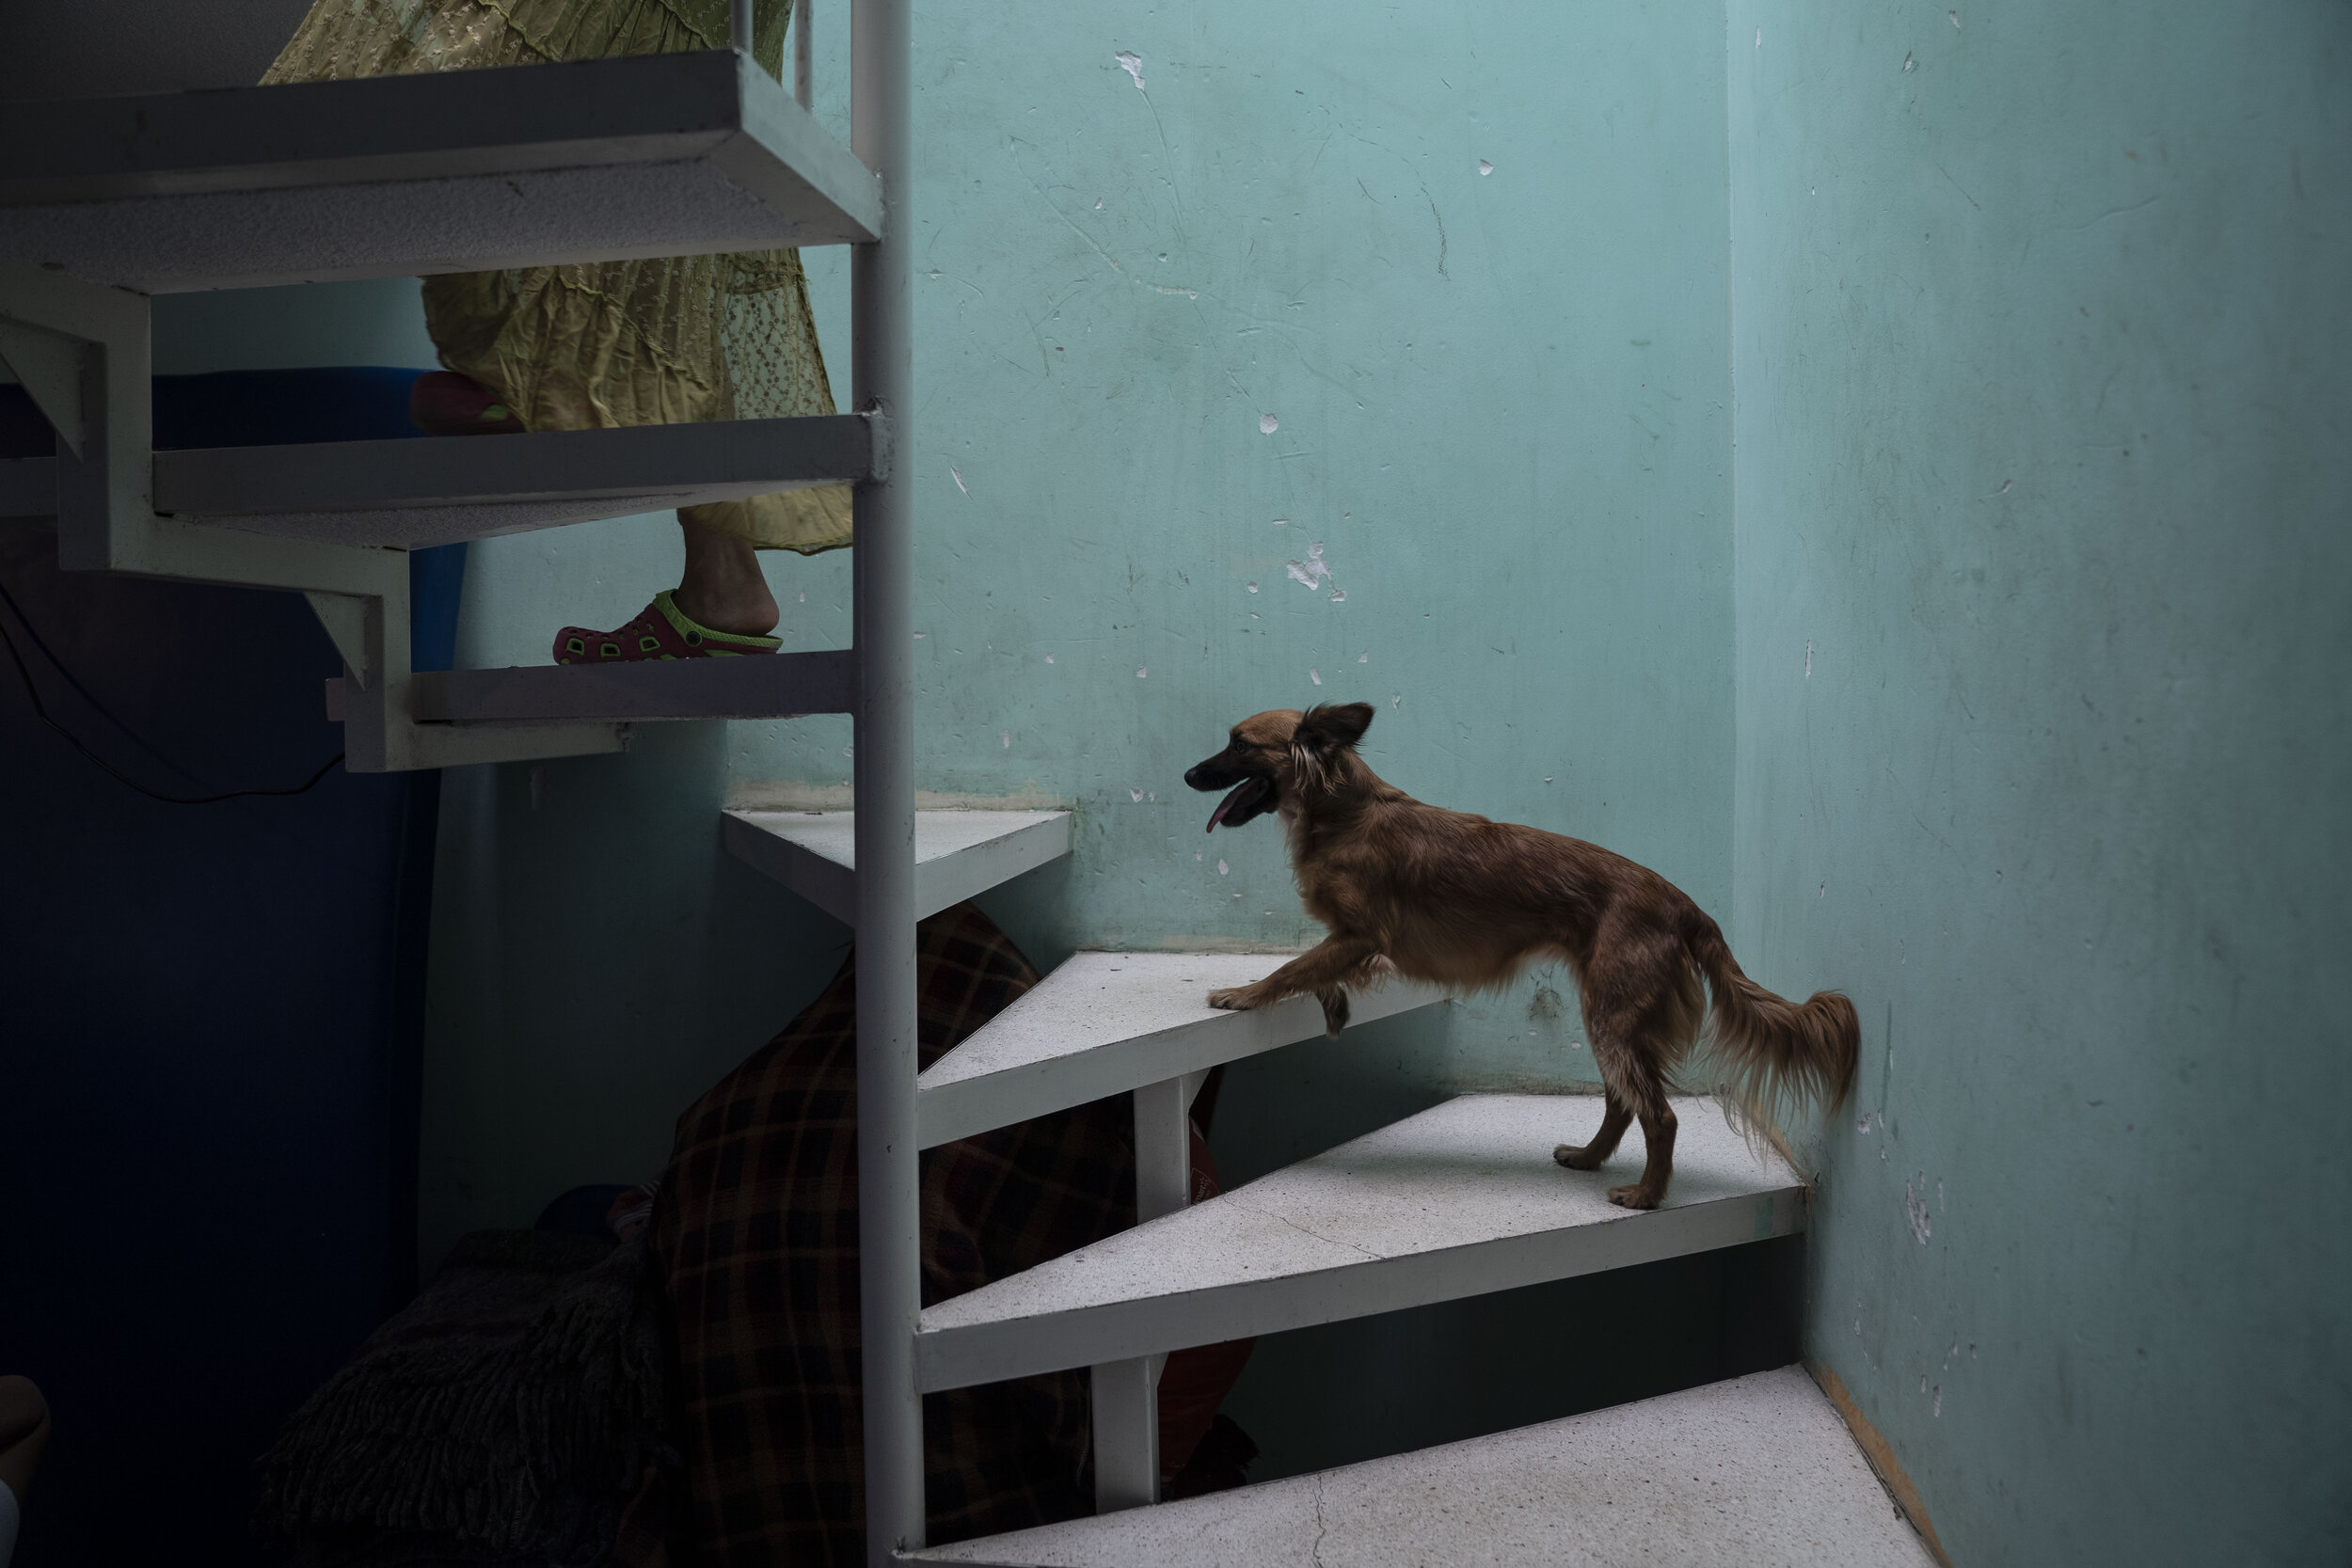   Nicky climbs the stairs in her new home in Chalco, State of Mexico.   